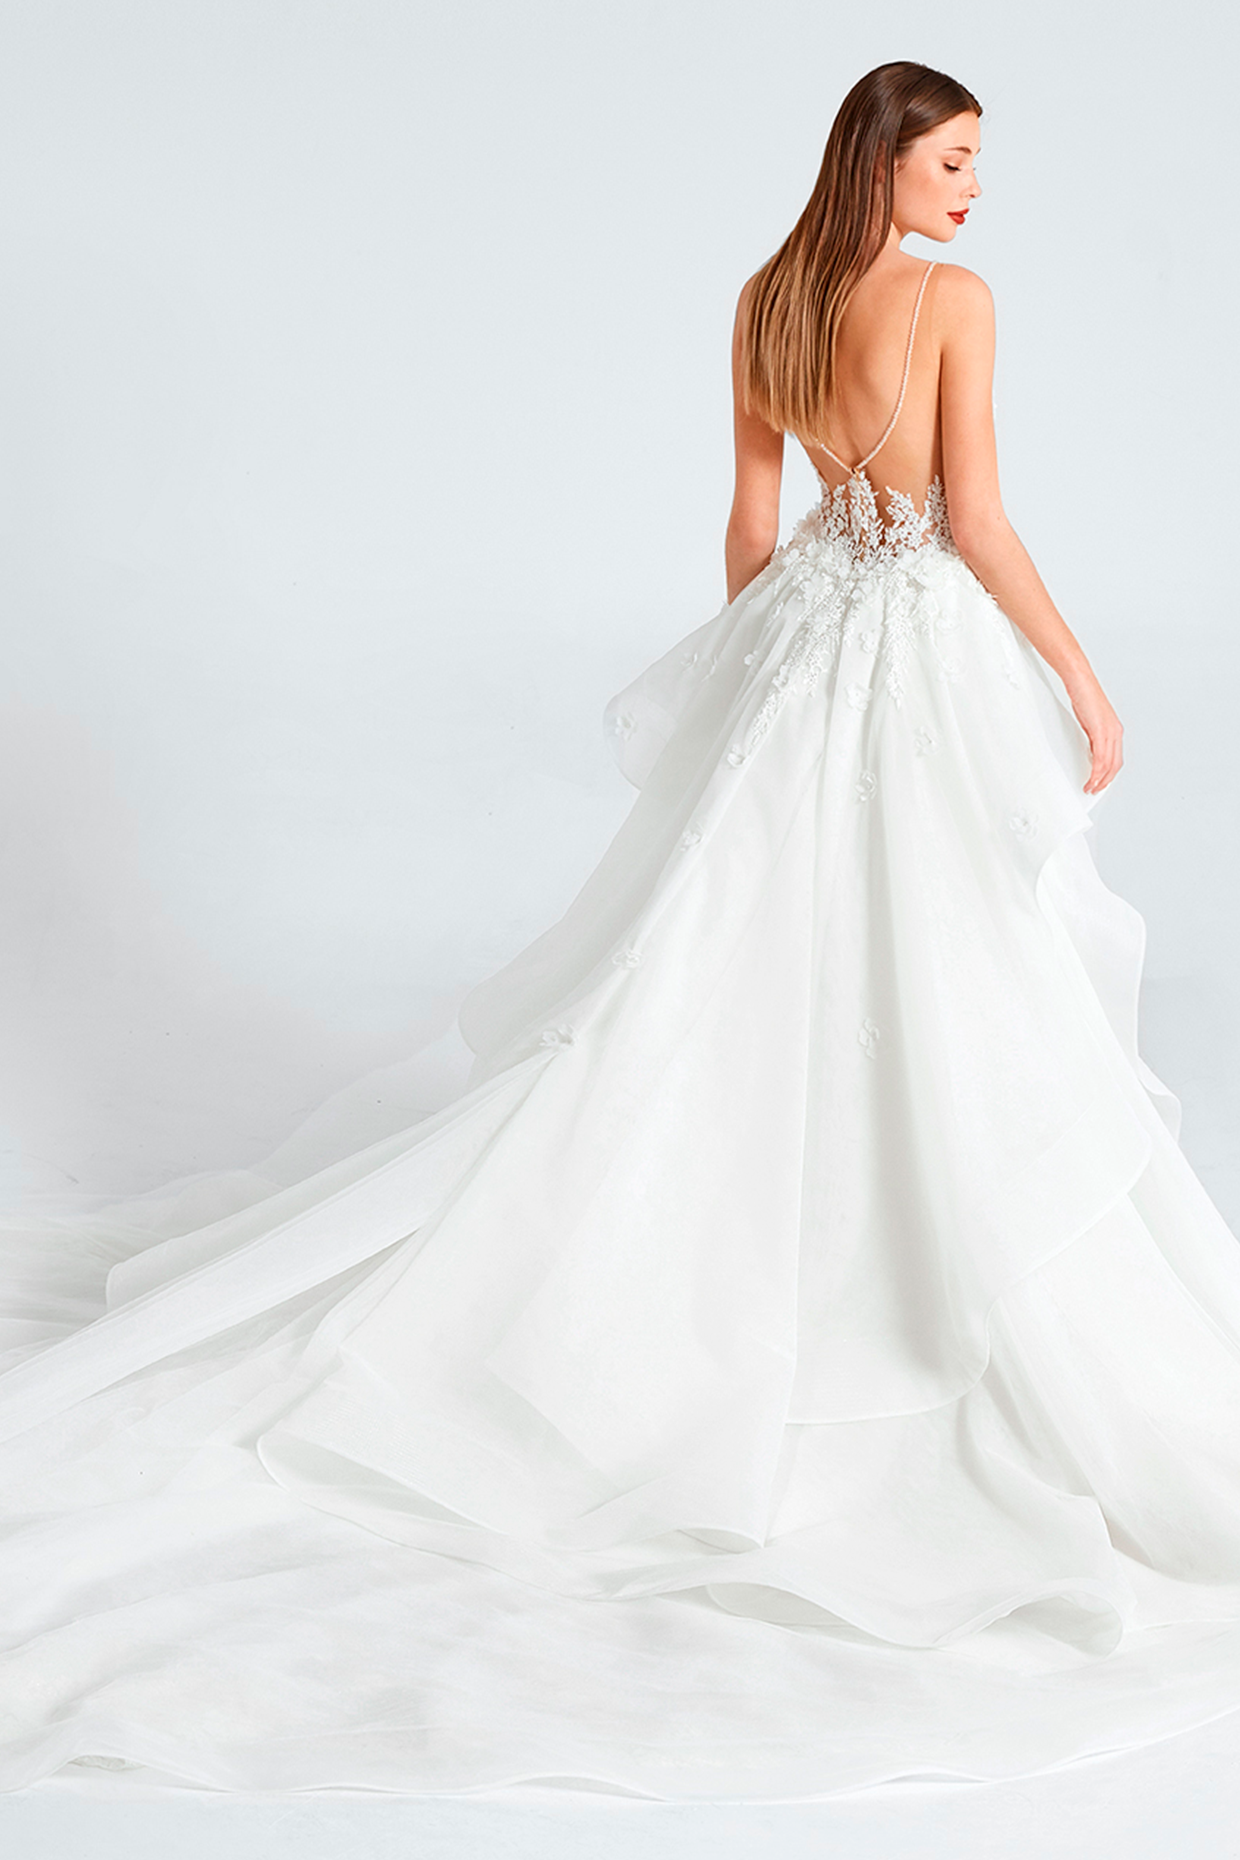 Ines Di Santo Fall 2021 Bridal Collection - Flirty Dress, Overskirt, Back View